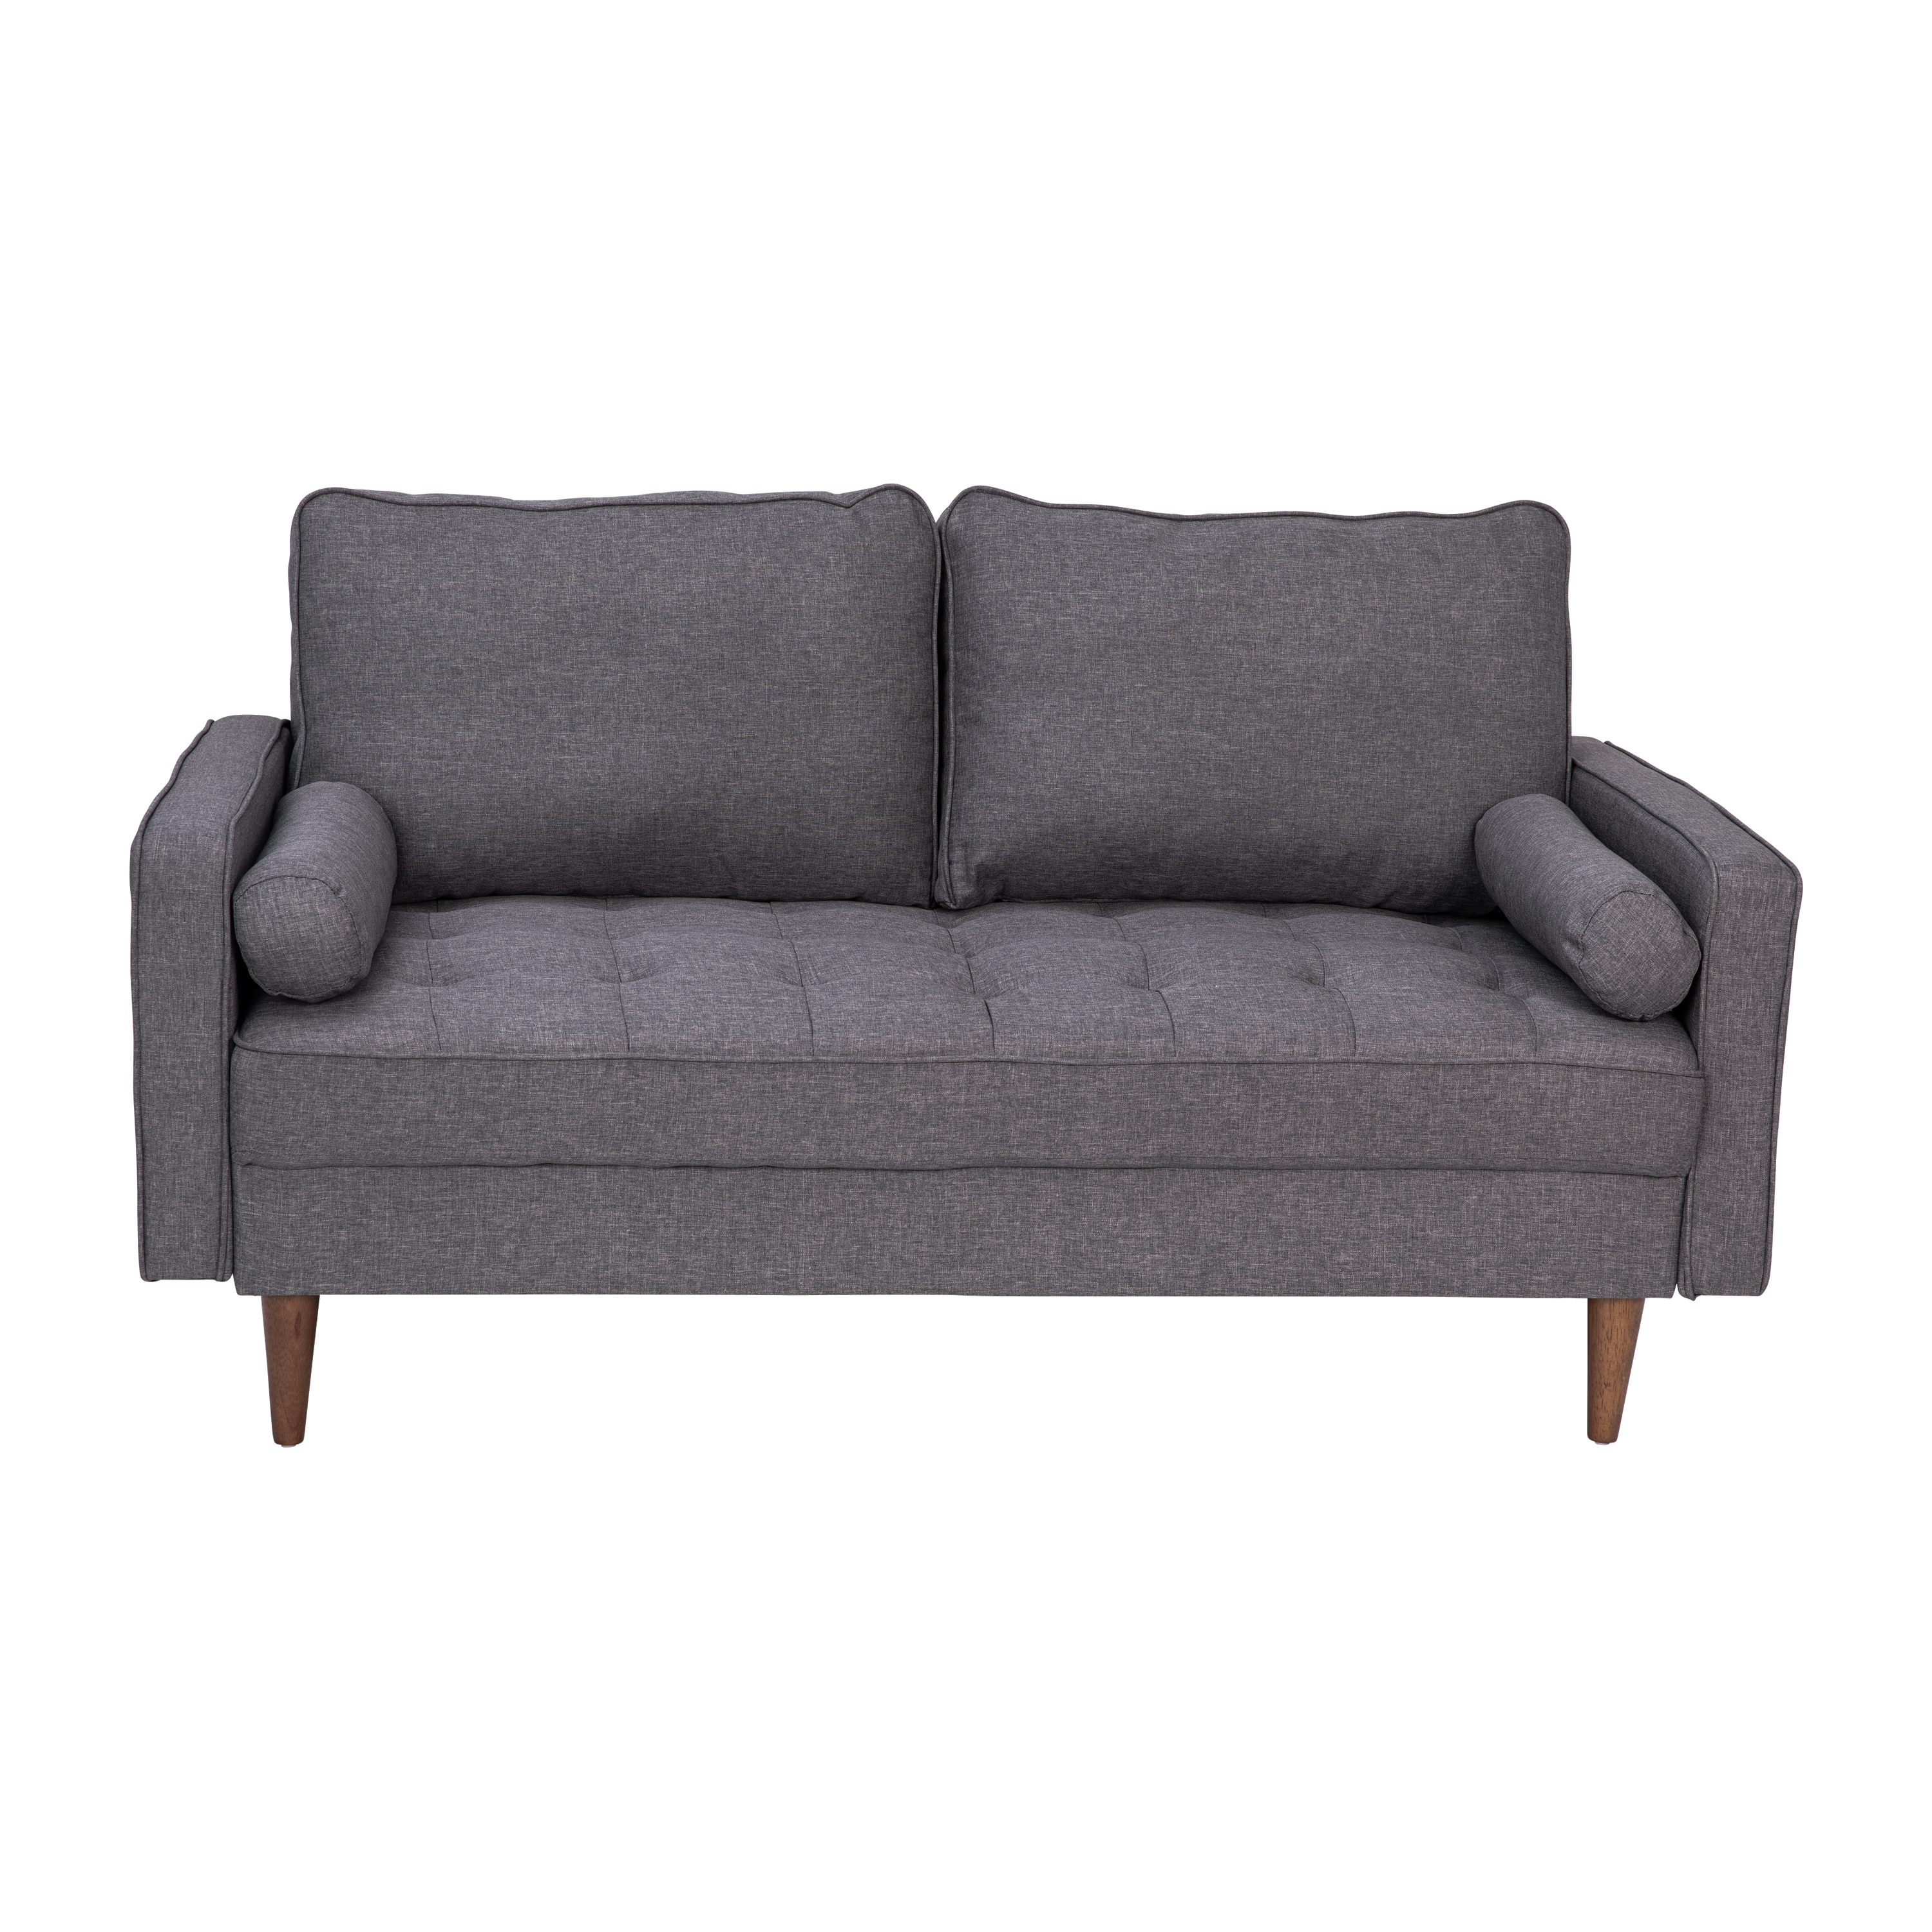 Flash Furniture IS-PL100-DKGY-GG Mid-Century Modern Dark Gray Tufted Faux Linen Loveseat Sofa with Wood Legs